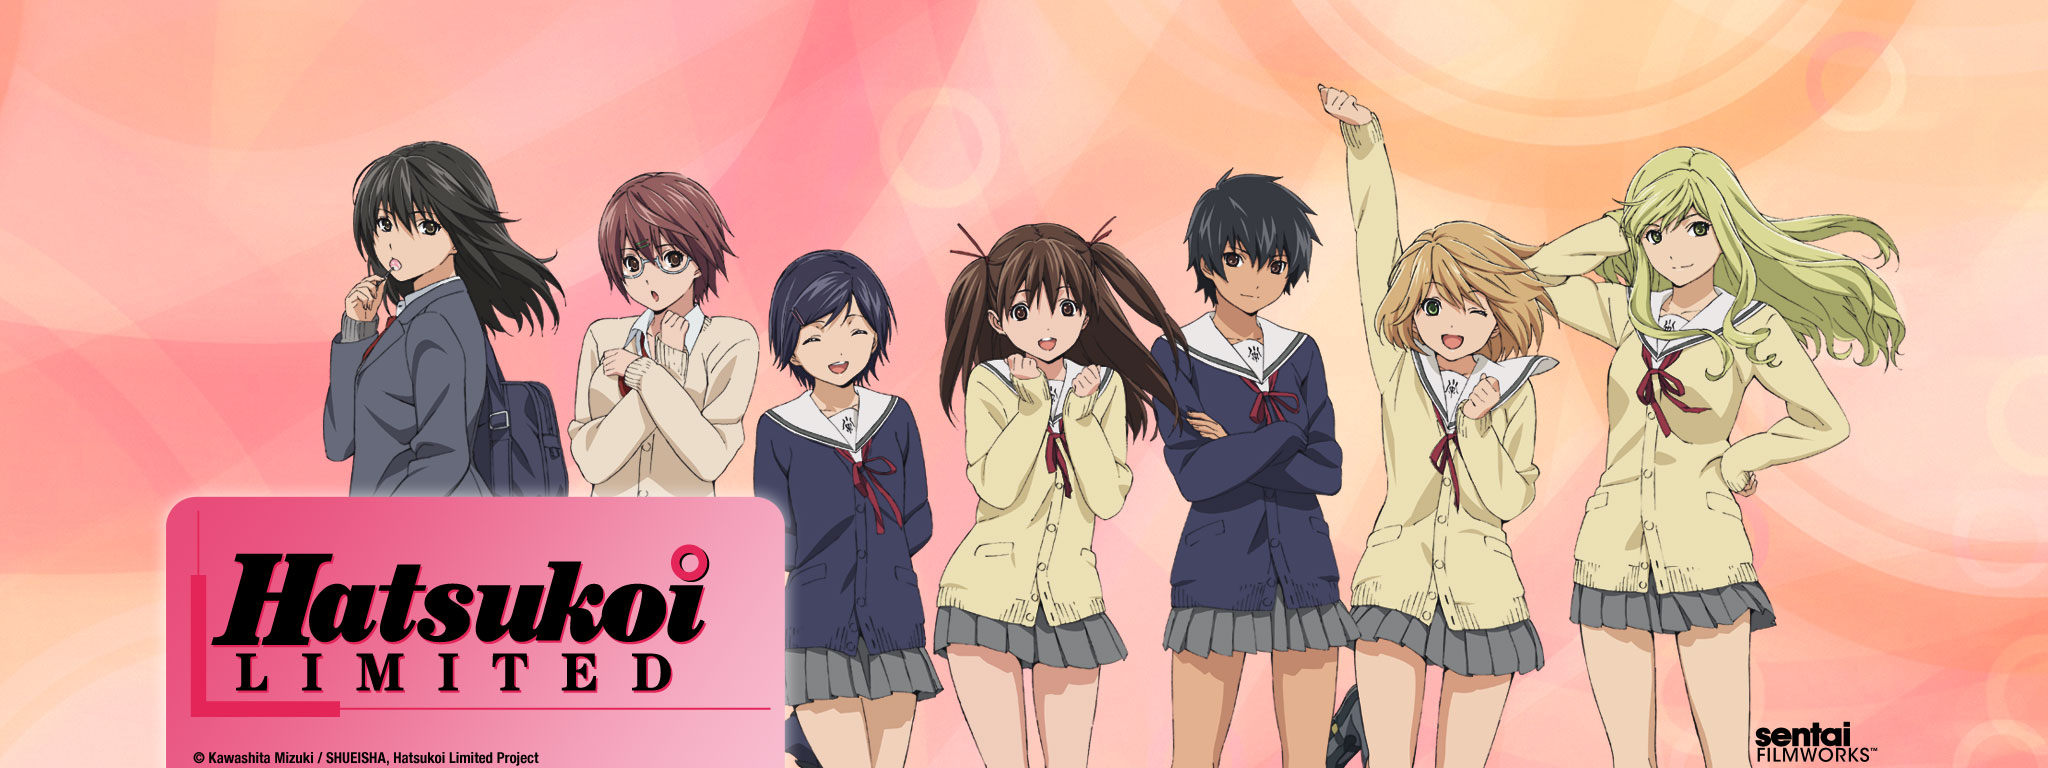 Title Art for Hatsukoi Limited